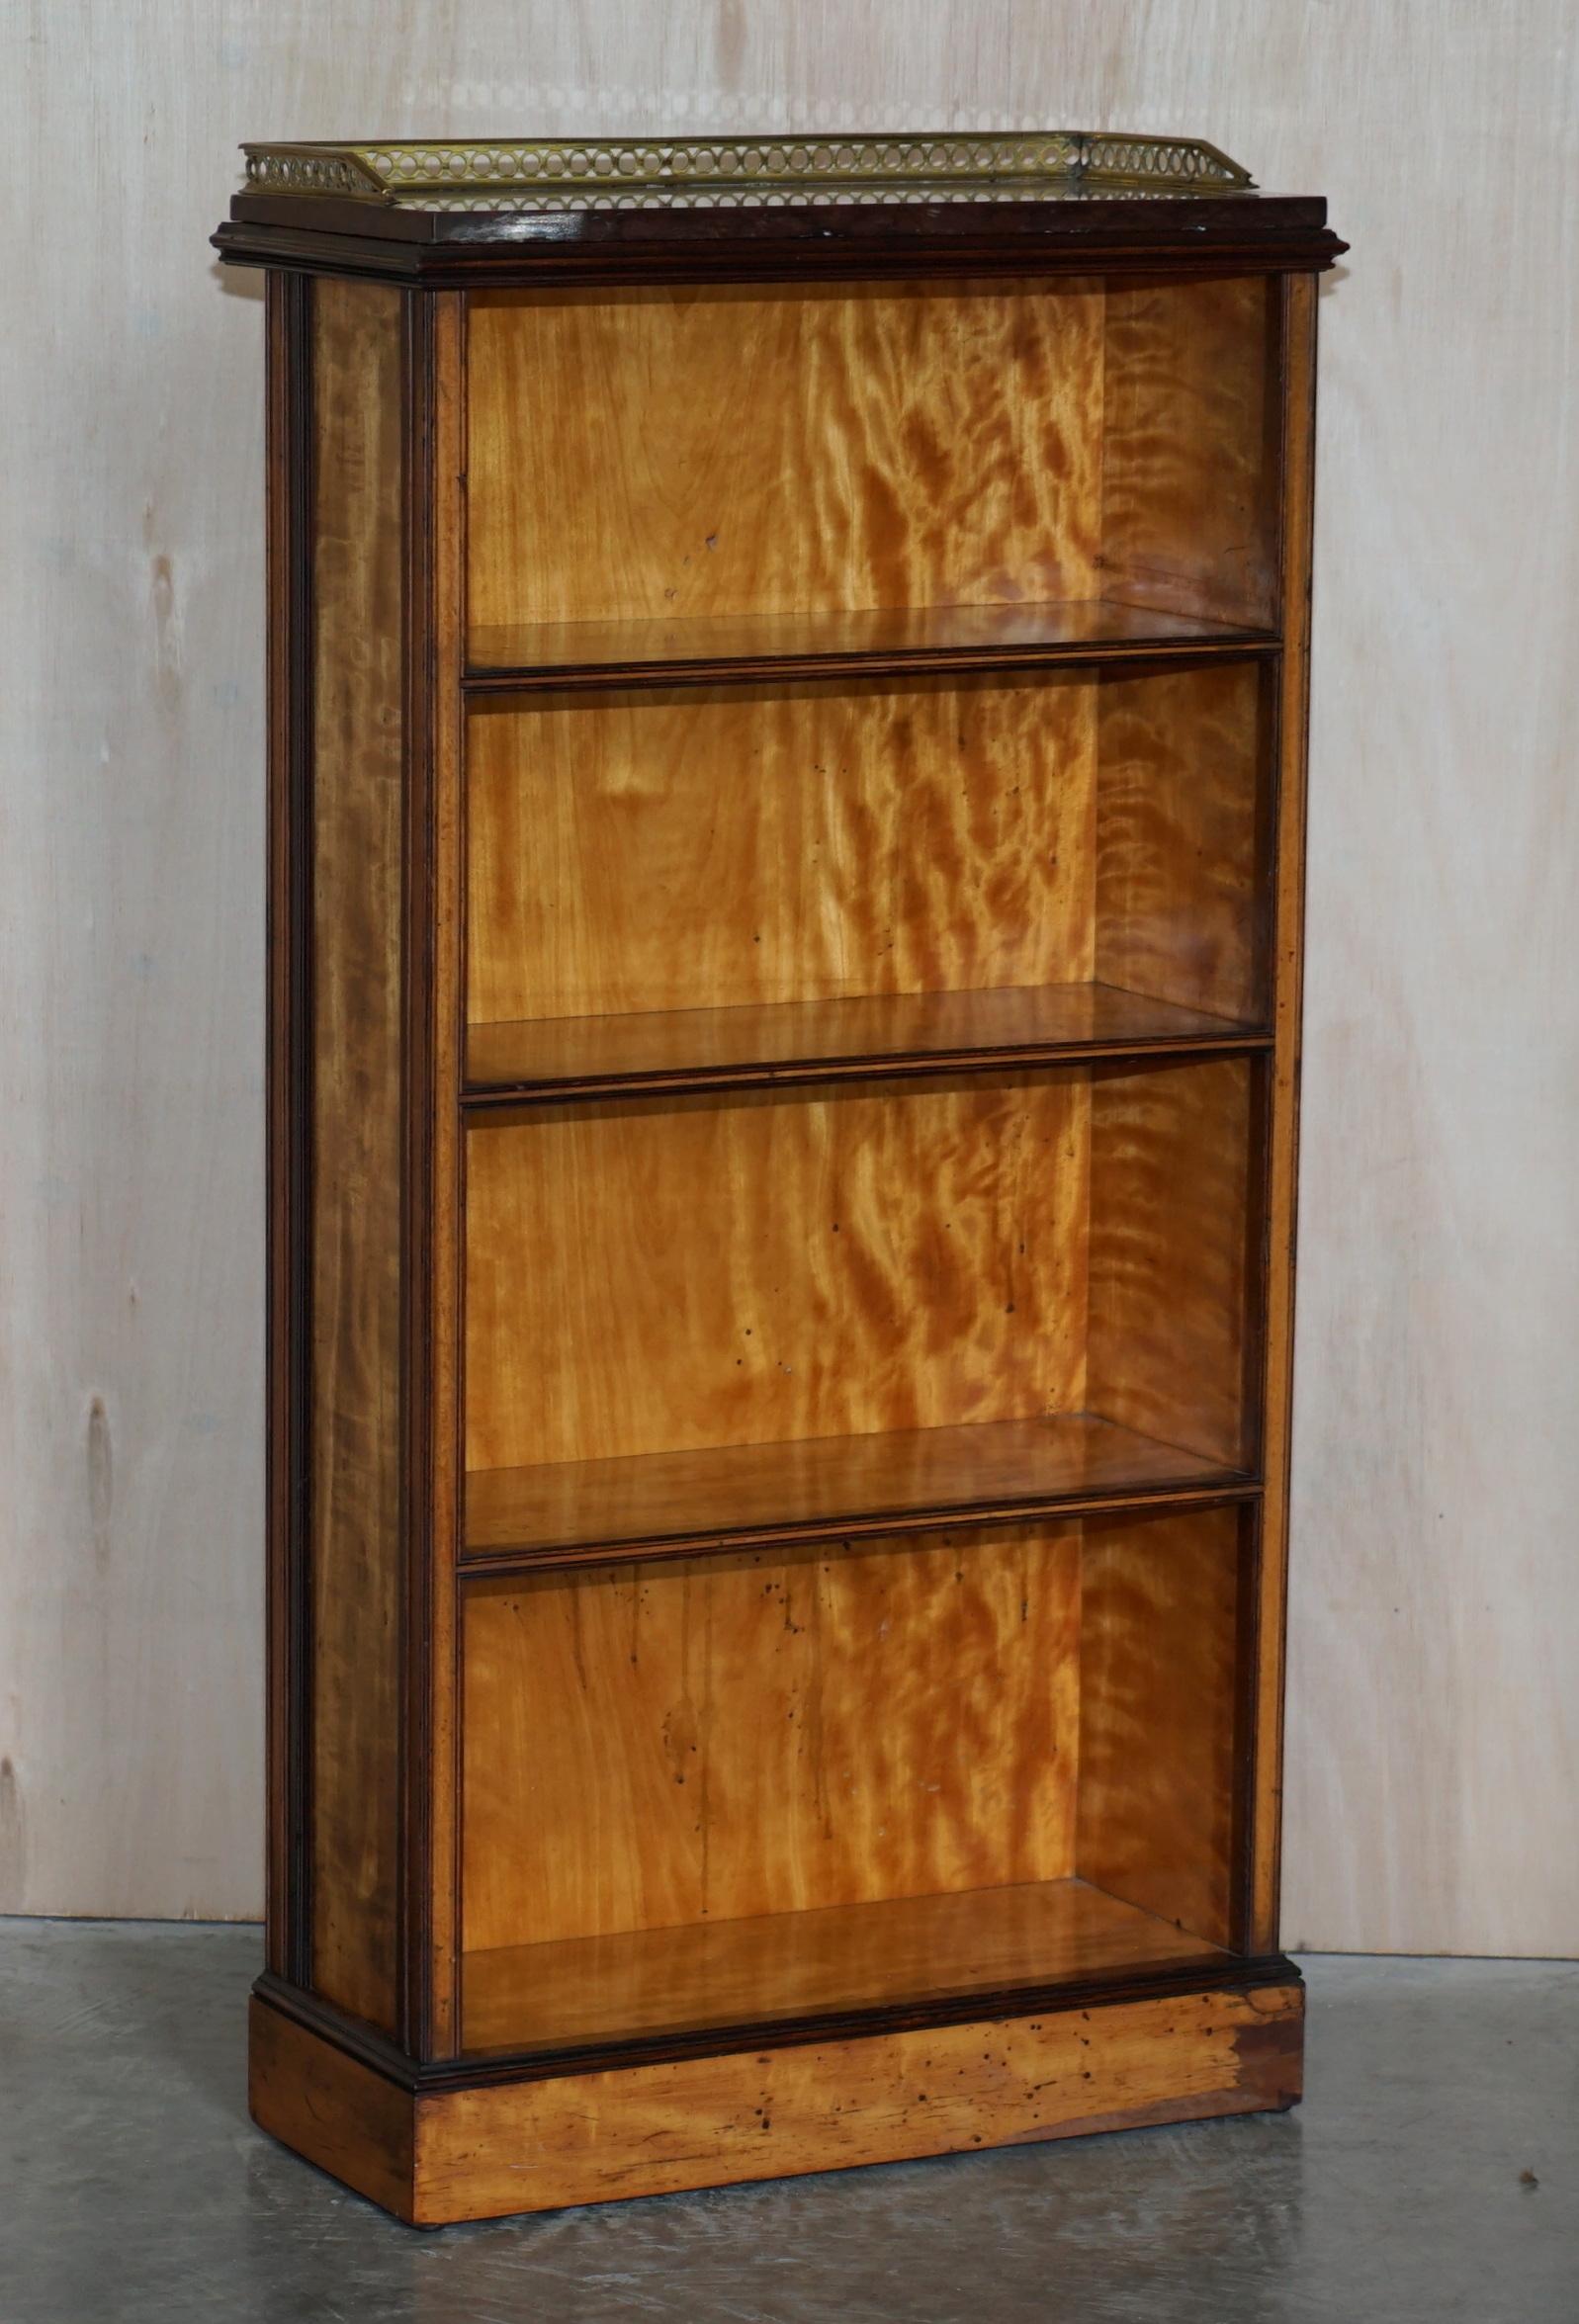 We are delighted to offer for sale this exquisite pair of very fine, Morison & Co Edinburgh dwarf open Library bookcases in Satin Birch and Rosewood with Italian Marble tops surmounted by pierced gallery rails

They are pretty much the finest pair